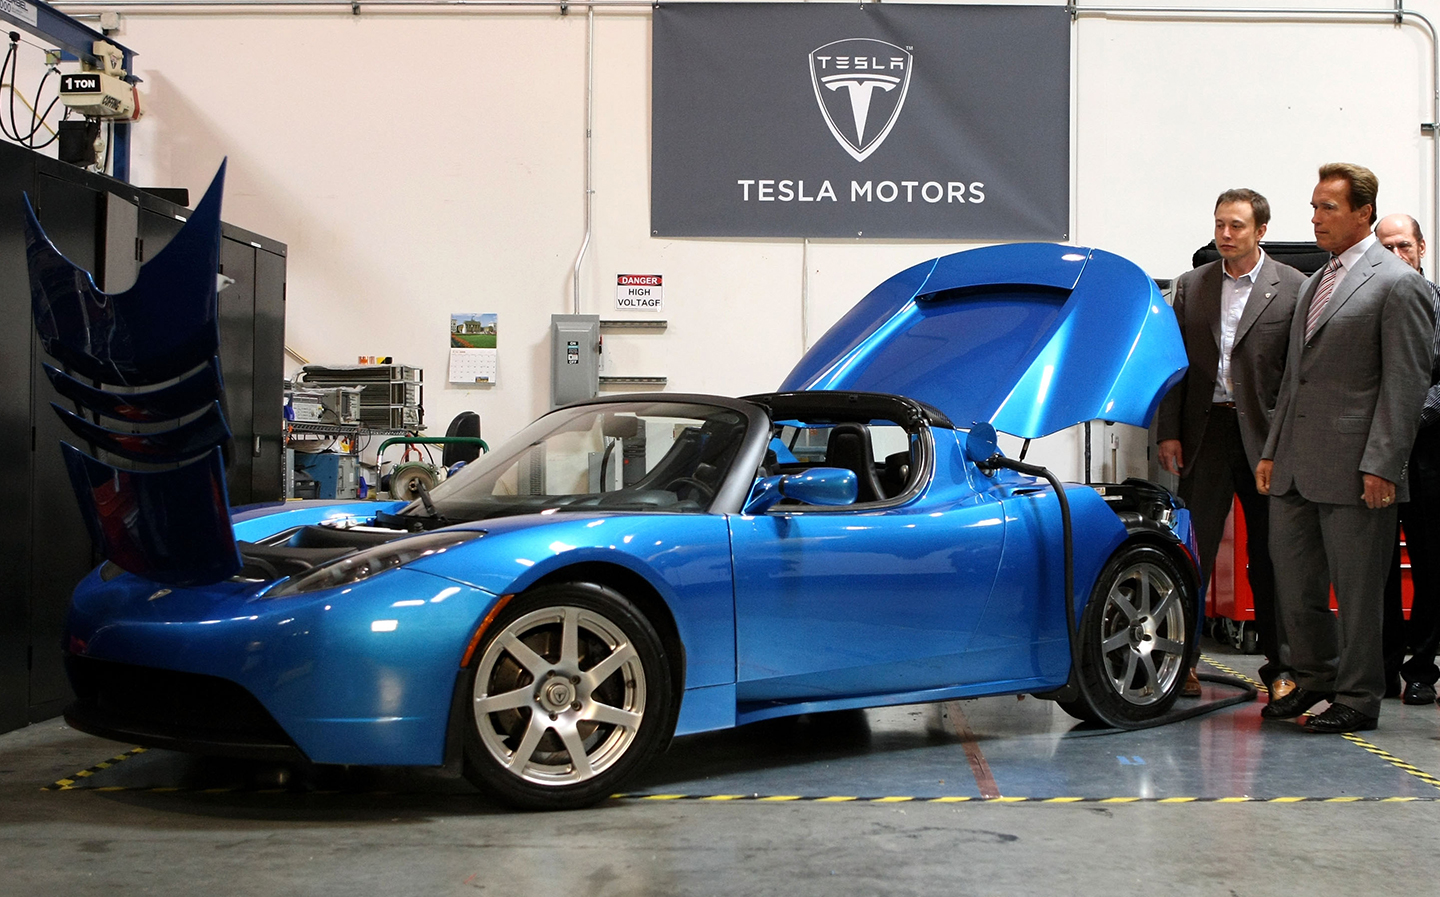 History of electric cars - Tesla Roadster